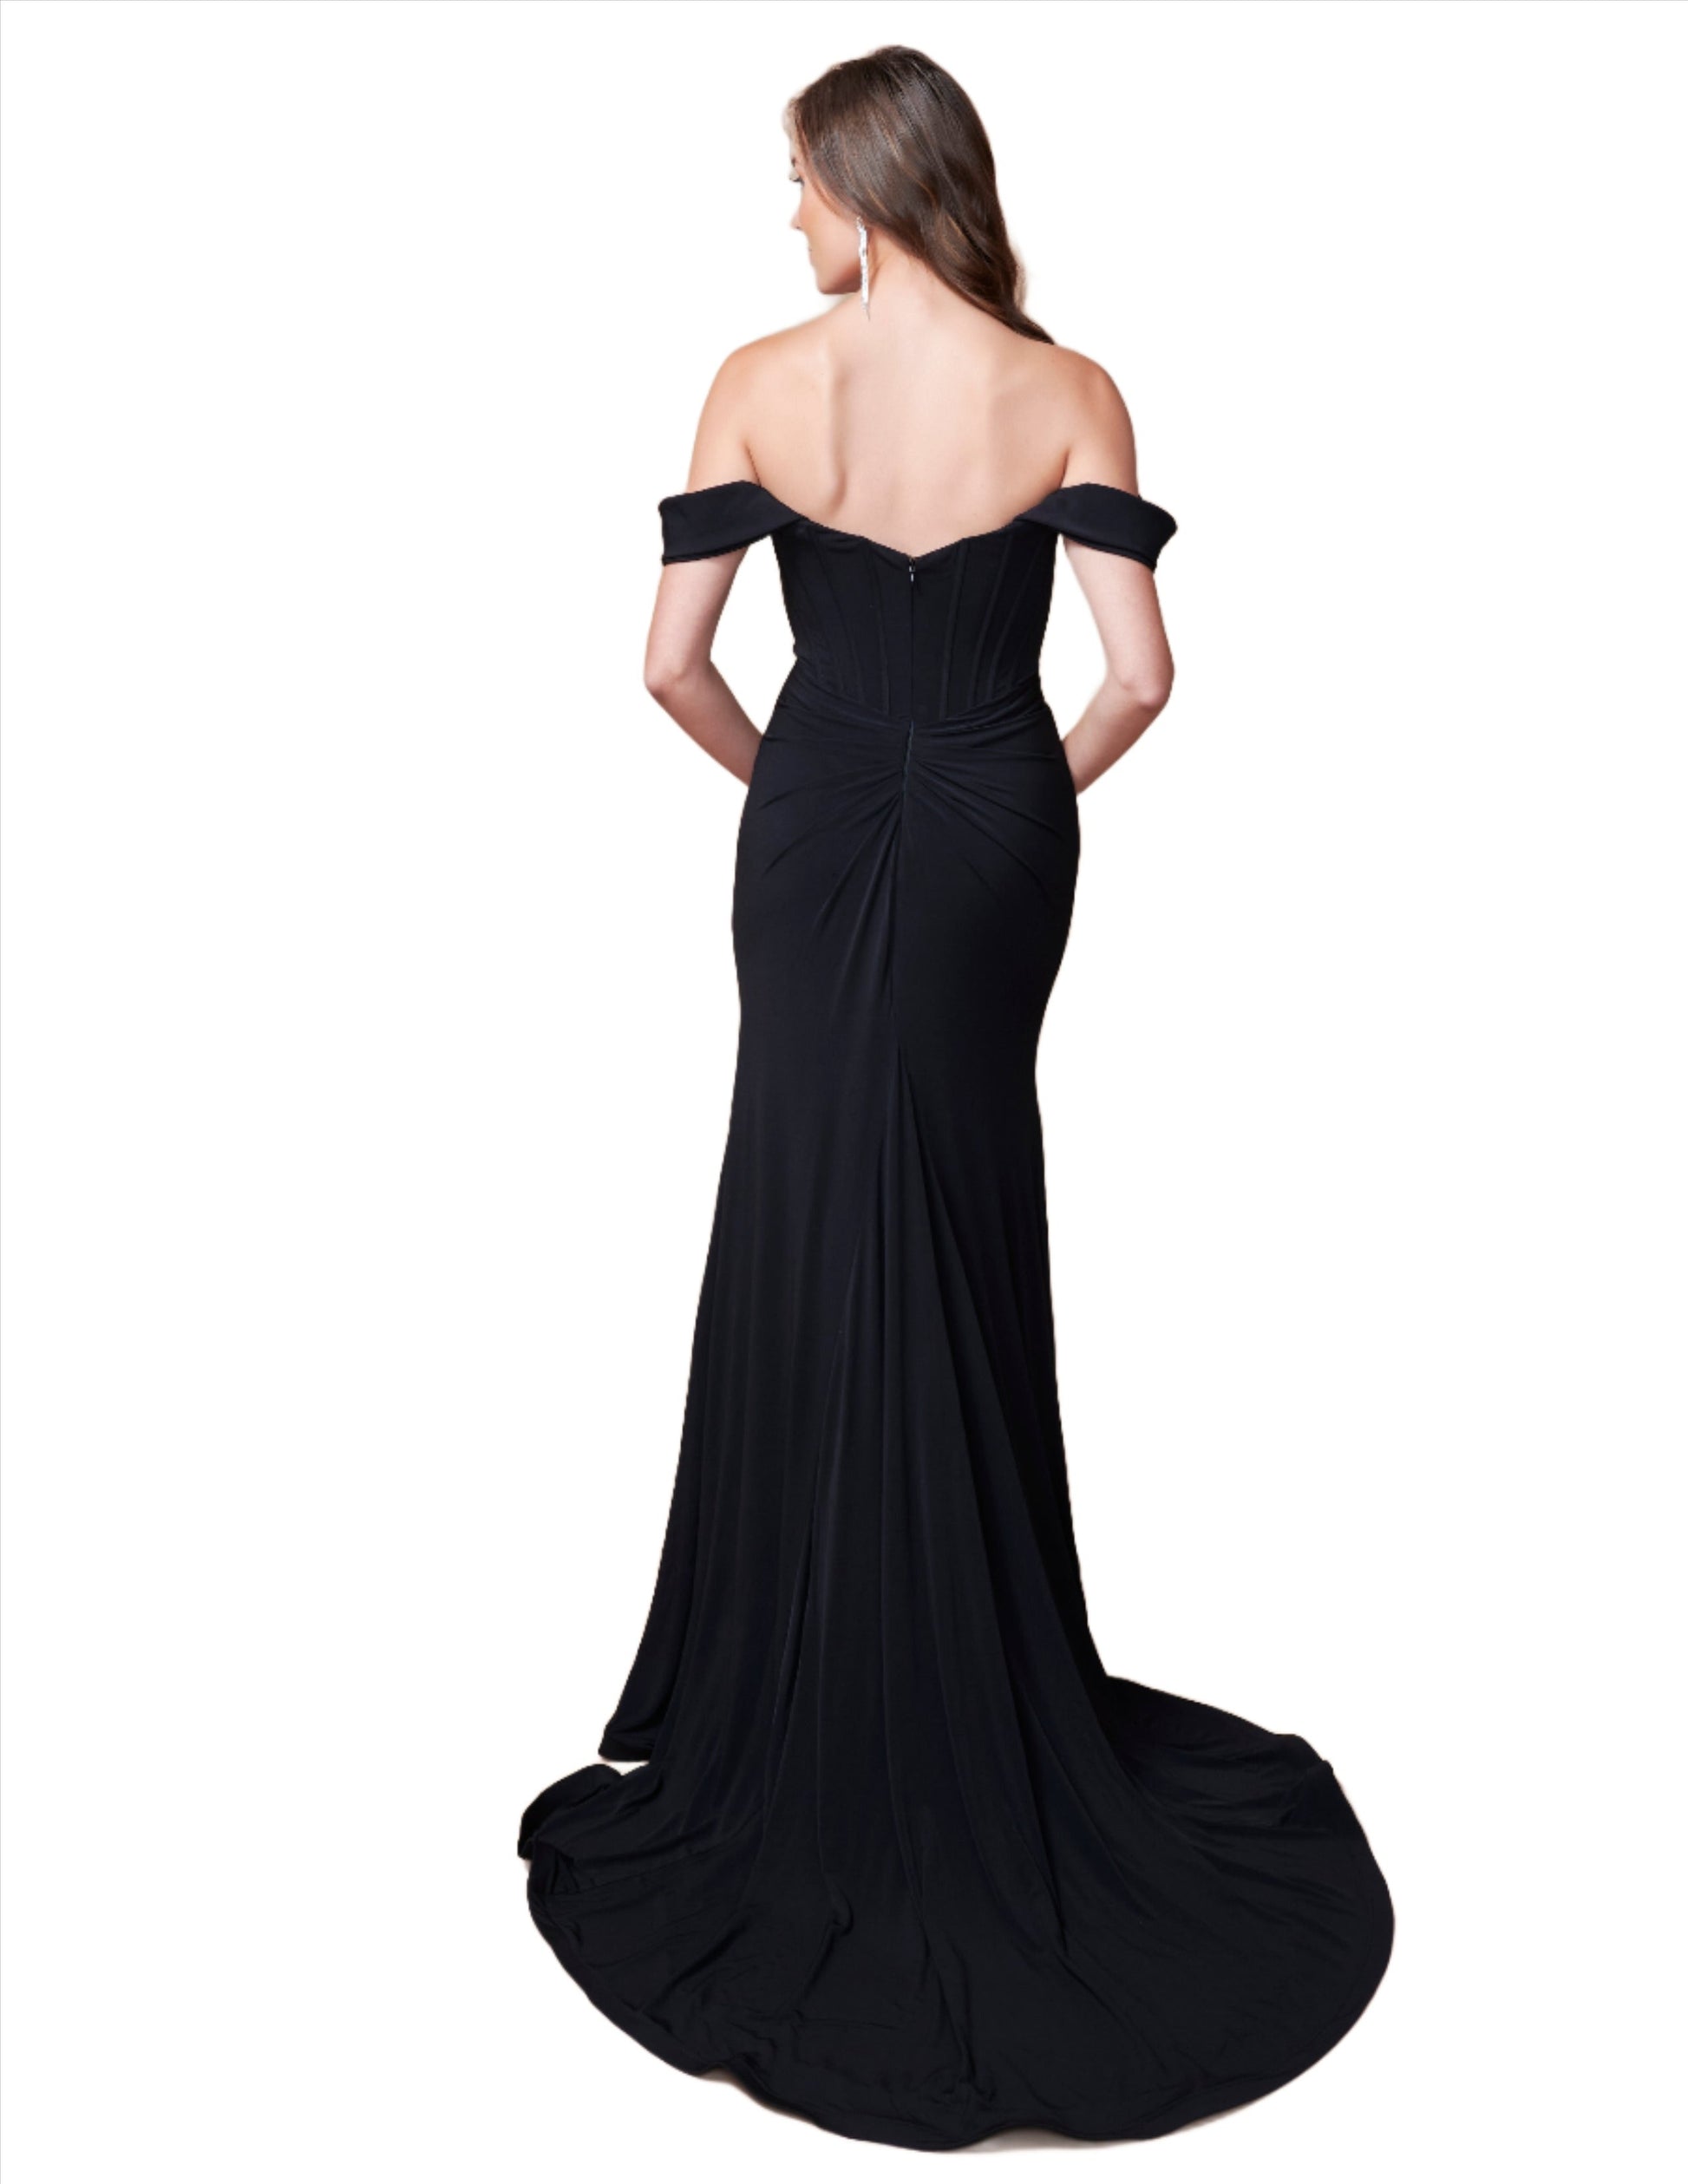 The Nina Canacci 2398 Fitted Corset Dress is a stunning evening gown that features an off the shoulder design and a flattering scoop neck. The fitted corset cinches the waist for a beautiful silhouette, while the slit adds a touch of elegance. Perfect for any formal occasion, this dress is sure to make you stand out.